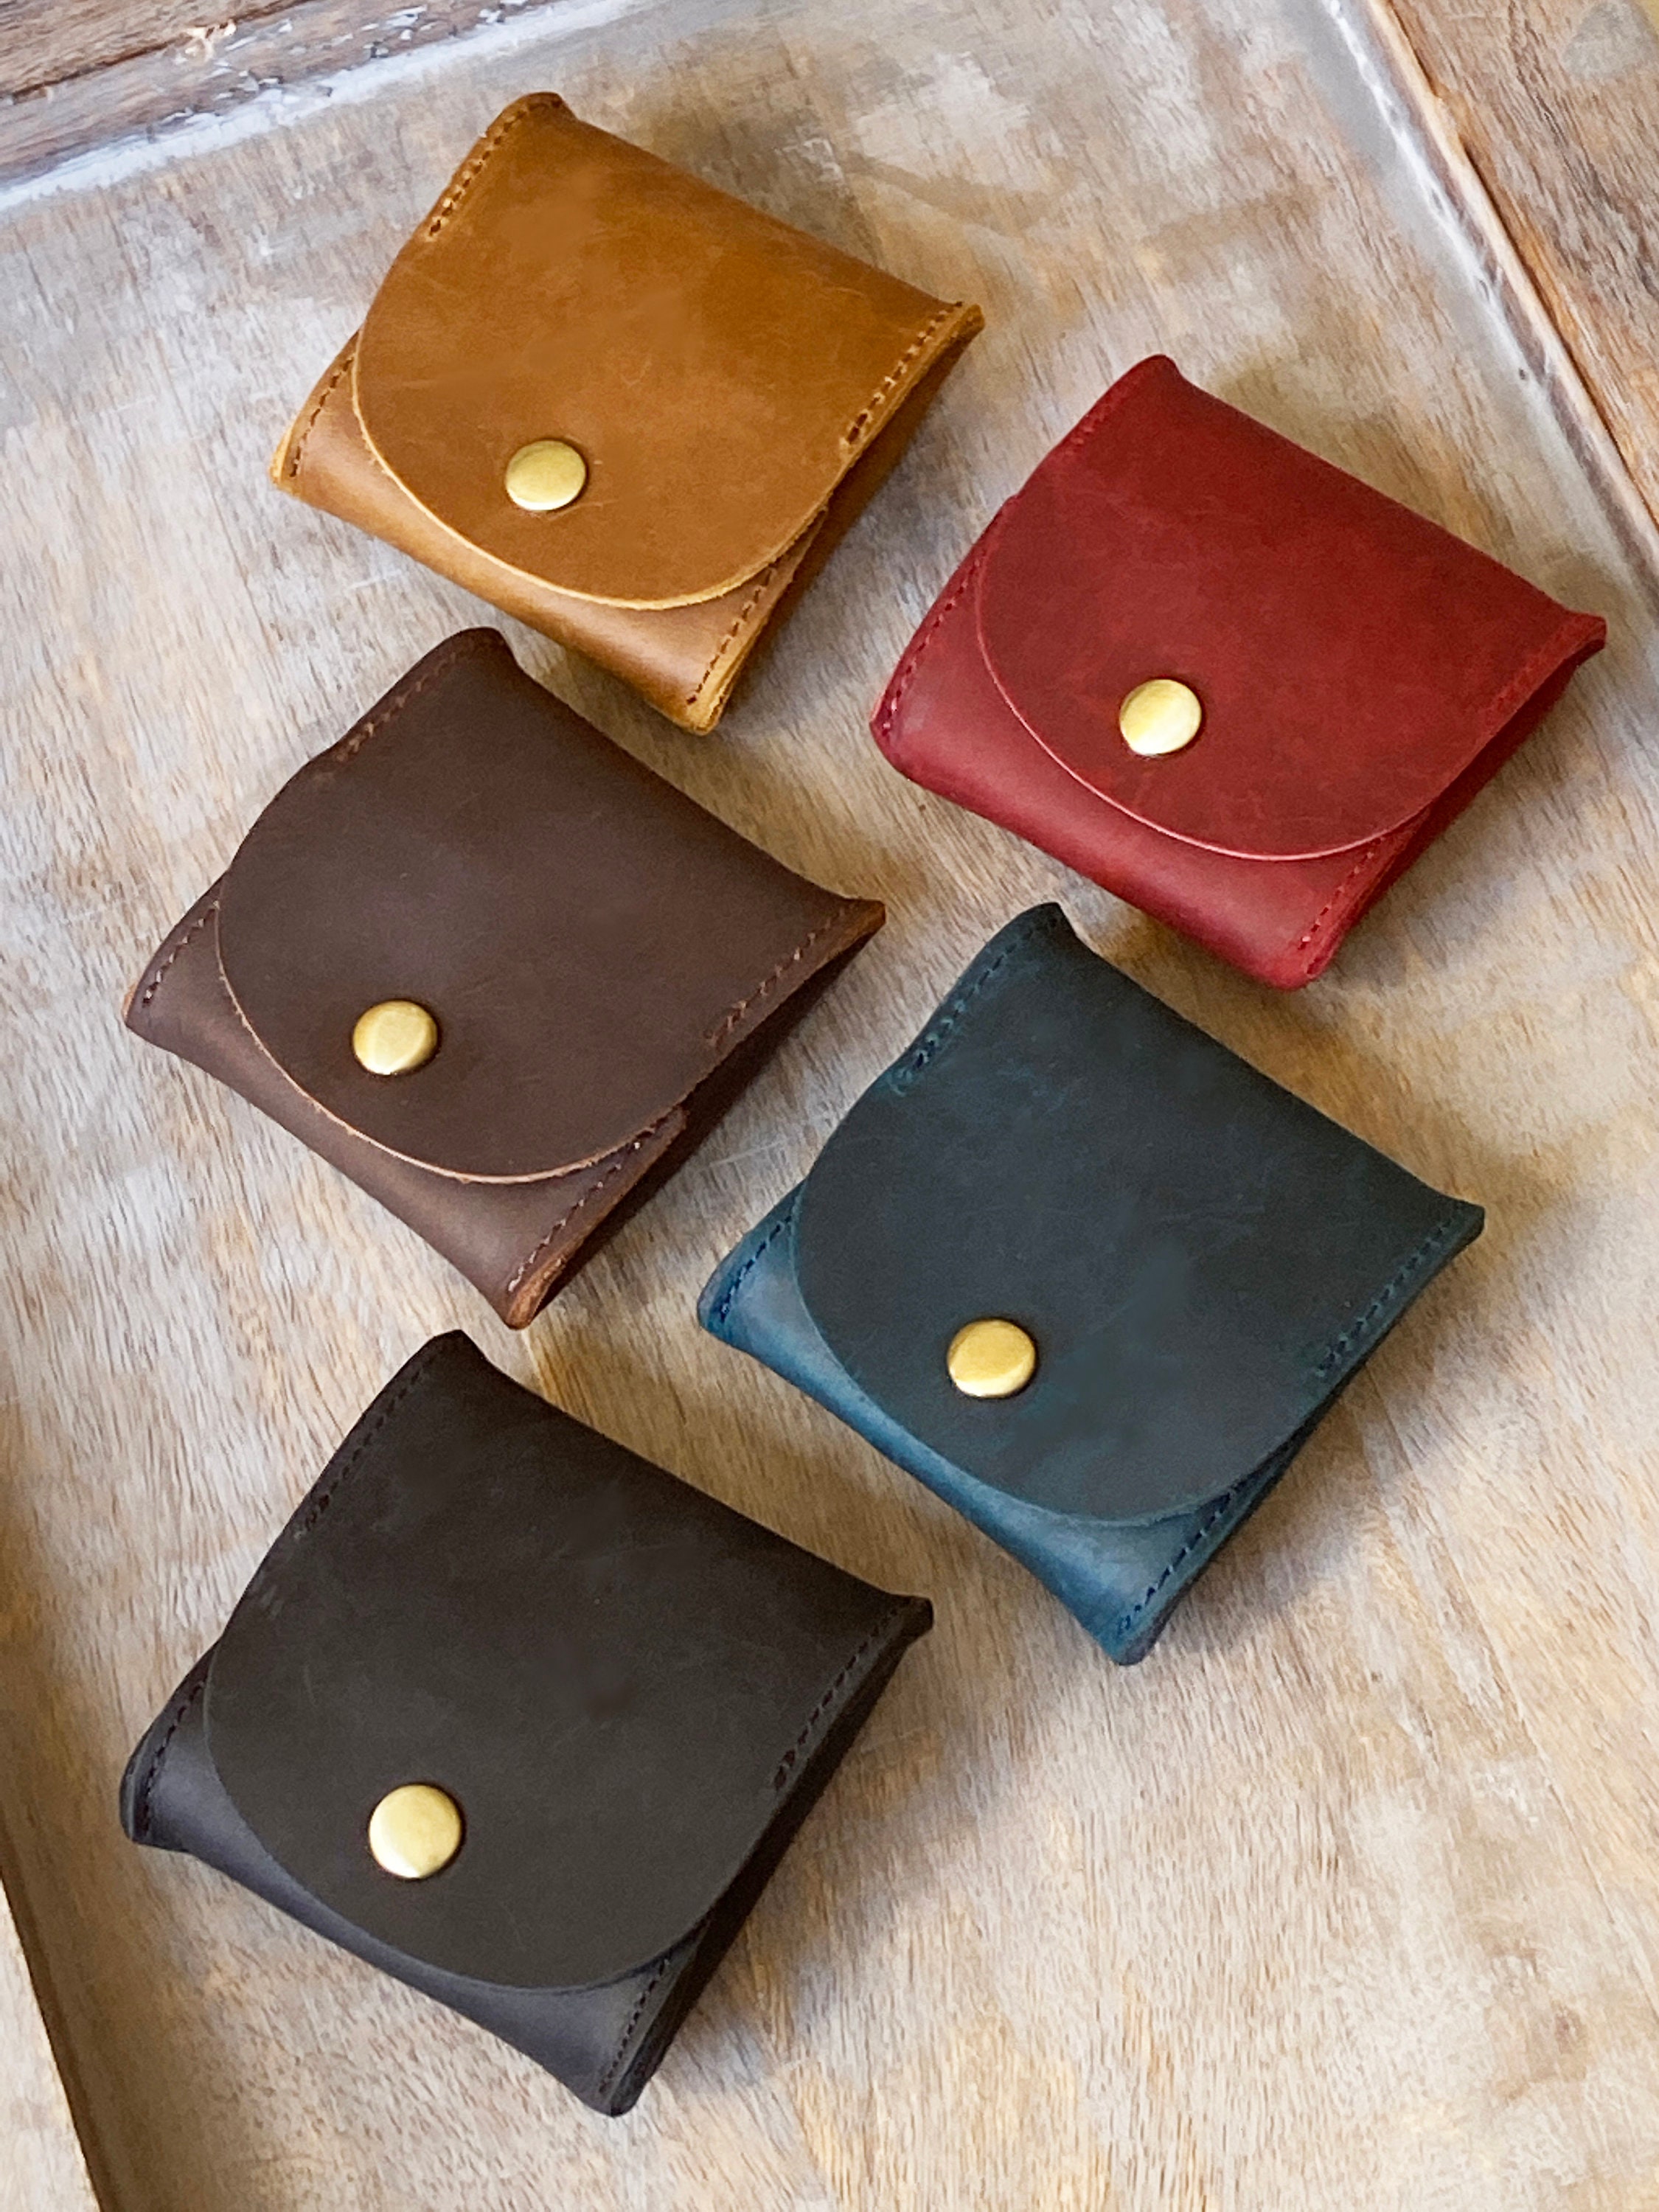 Leather Coin Purse 